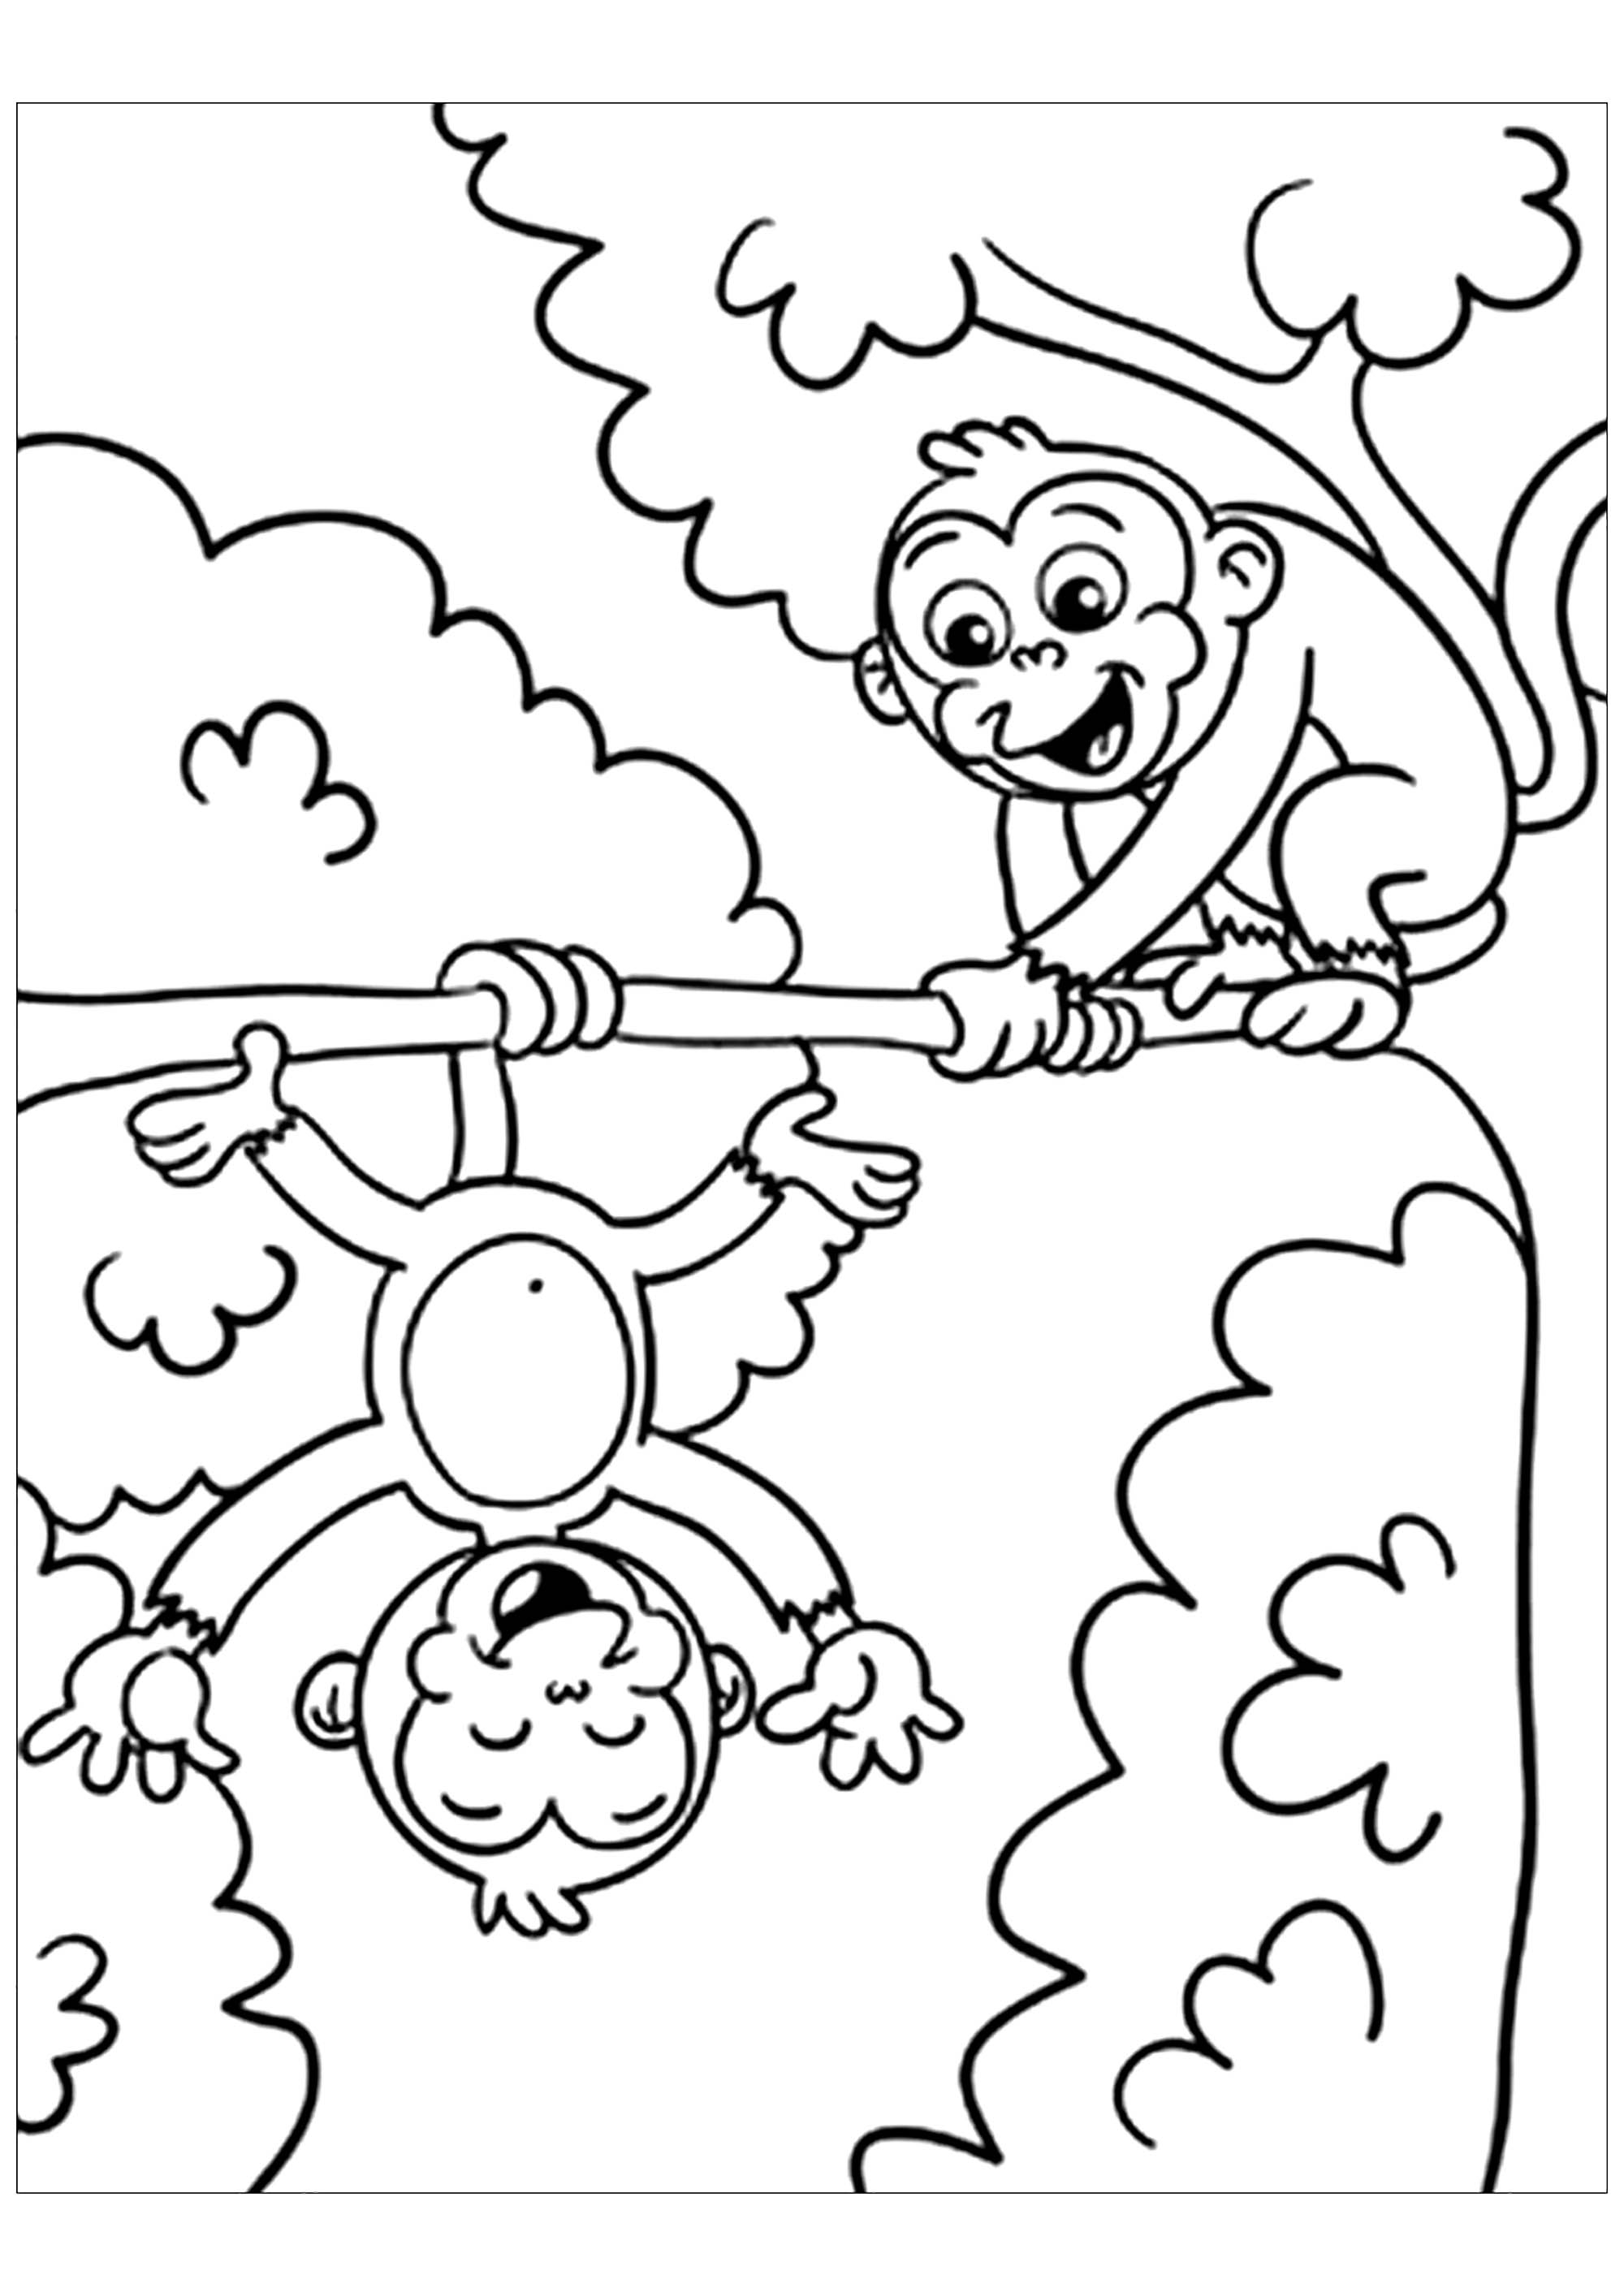 Coloring Pages Of Monkeys Monkeys To Print For Free Monkeys Kids Coloring Pages